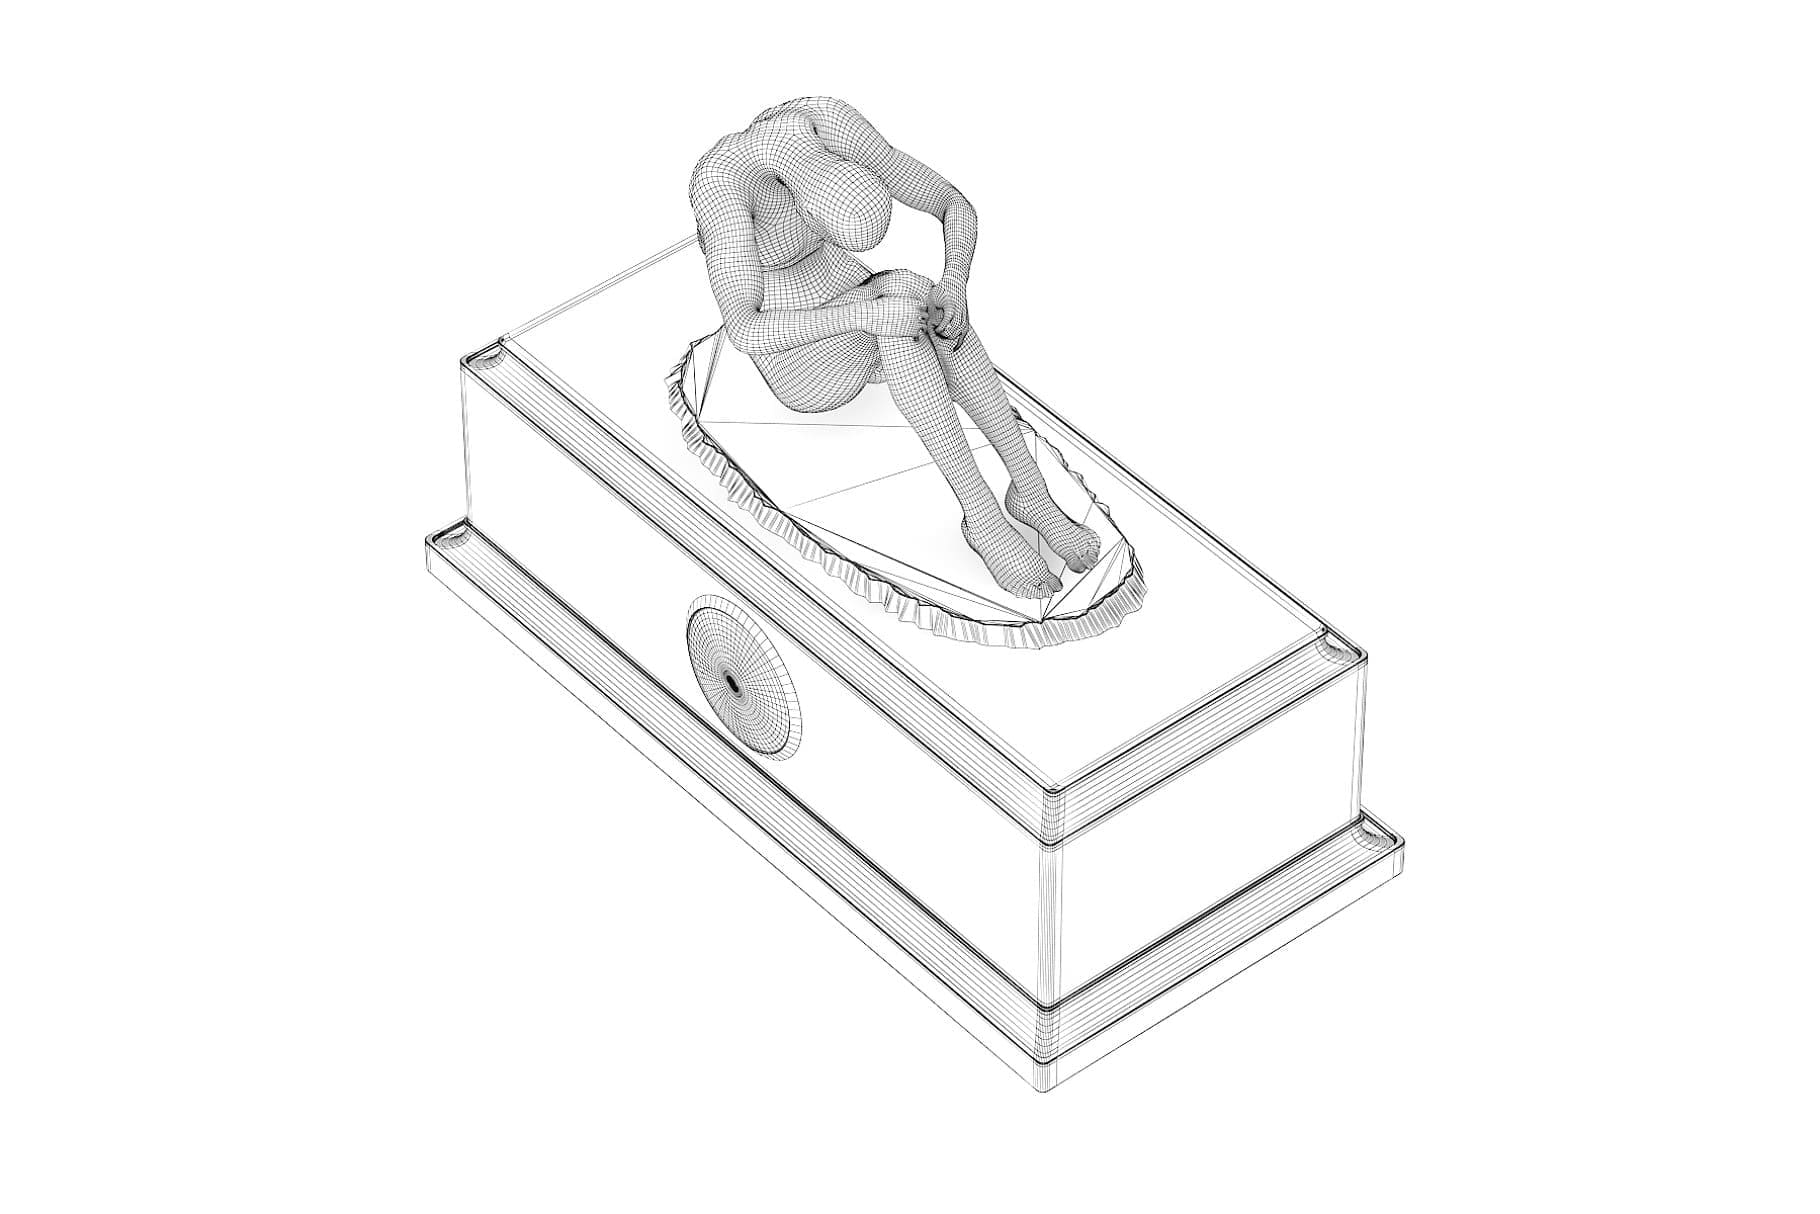 Top view of a clock mesh model with a seated statue.